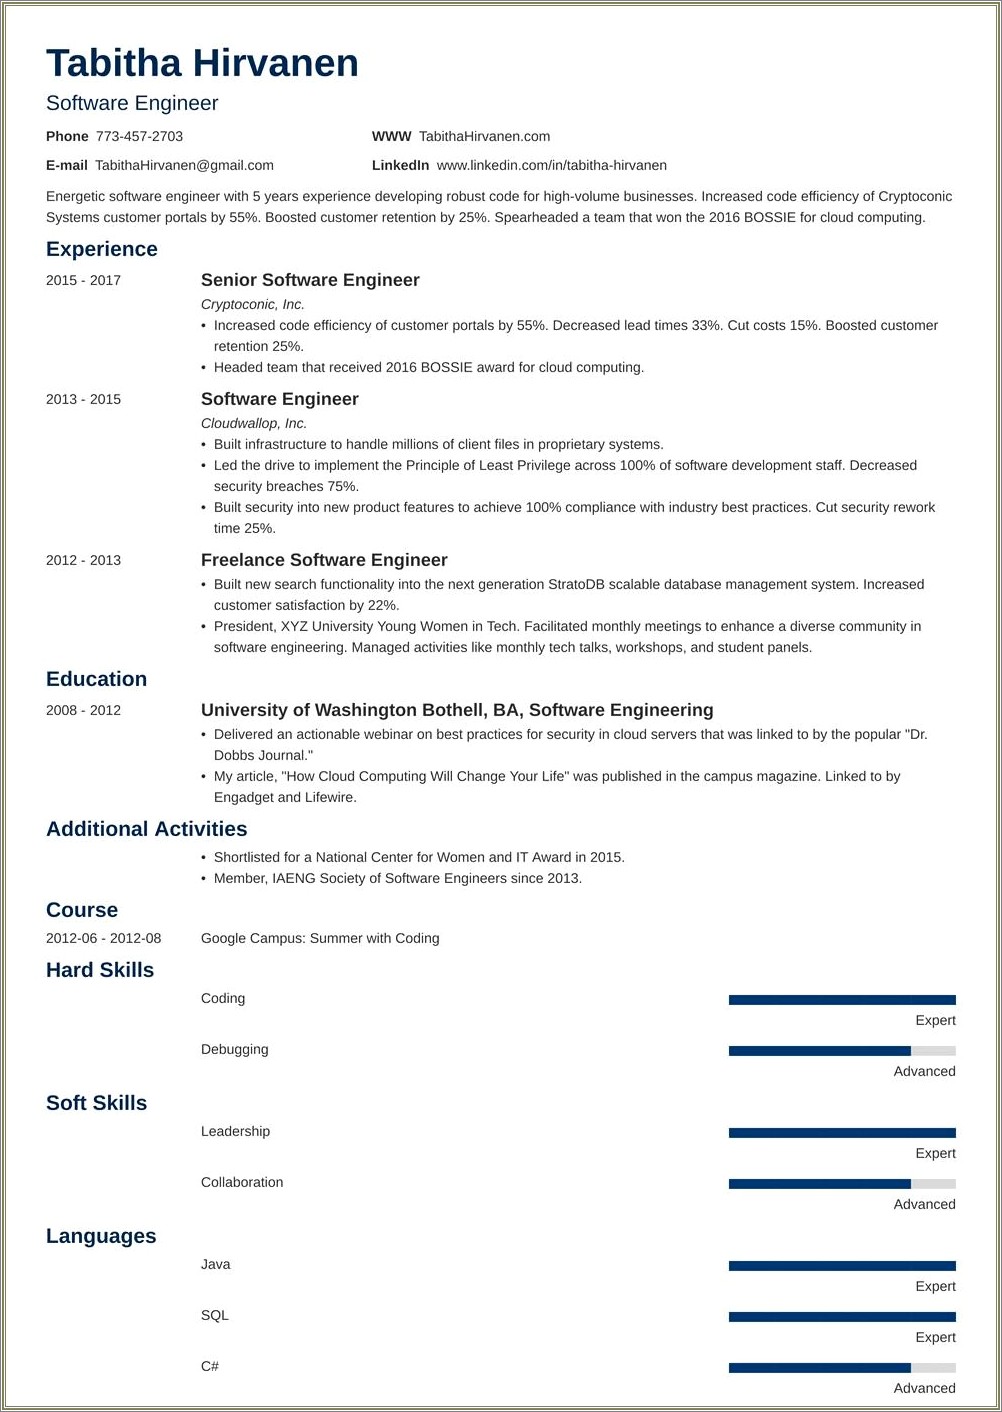 8 Year Experience Resume For Mechanical Engineer